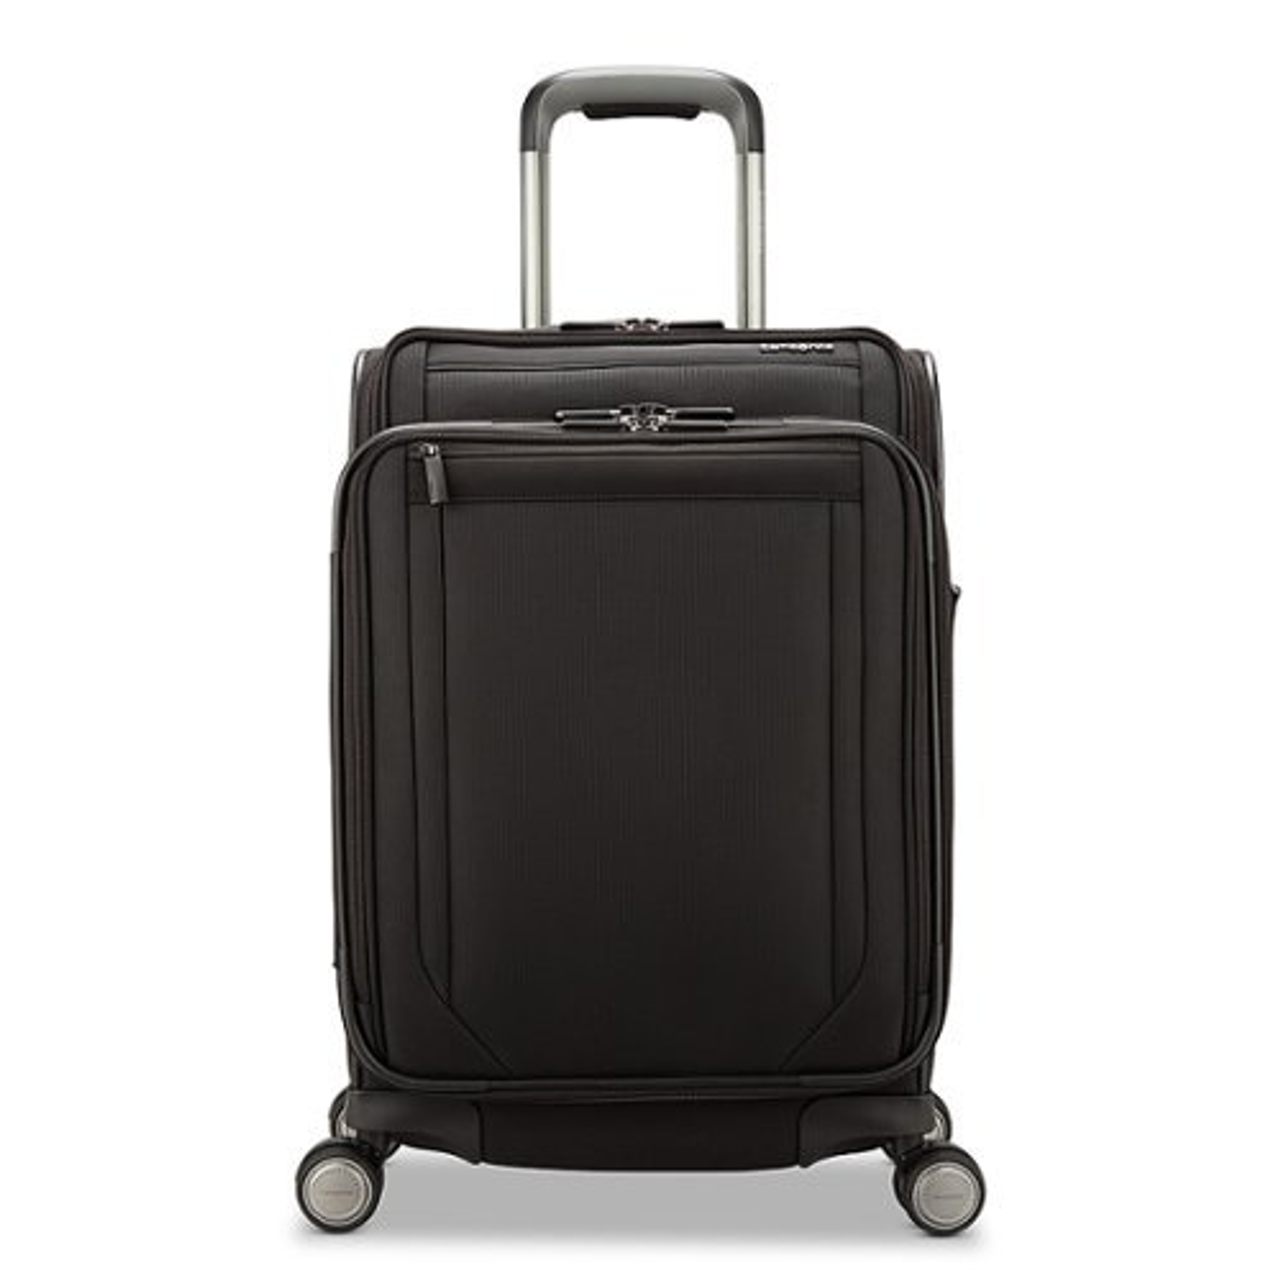 Samsonite - Lineate DLX Carry On 22" Expandable Spinner Suitcase - Black